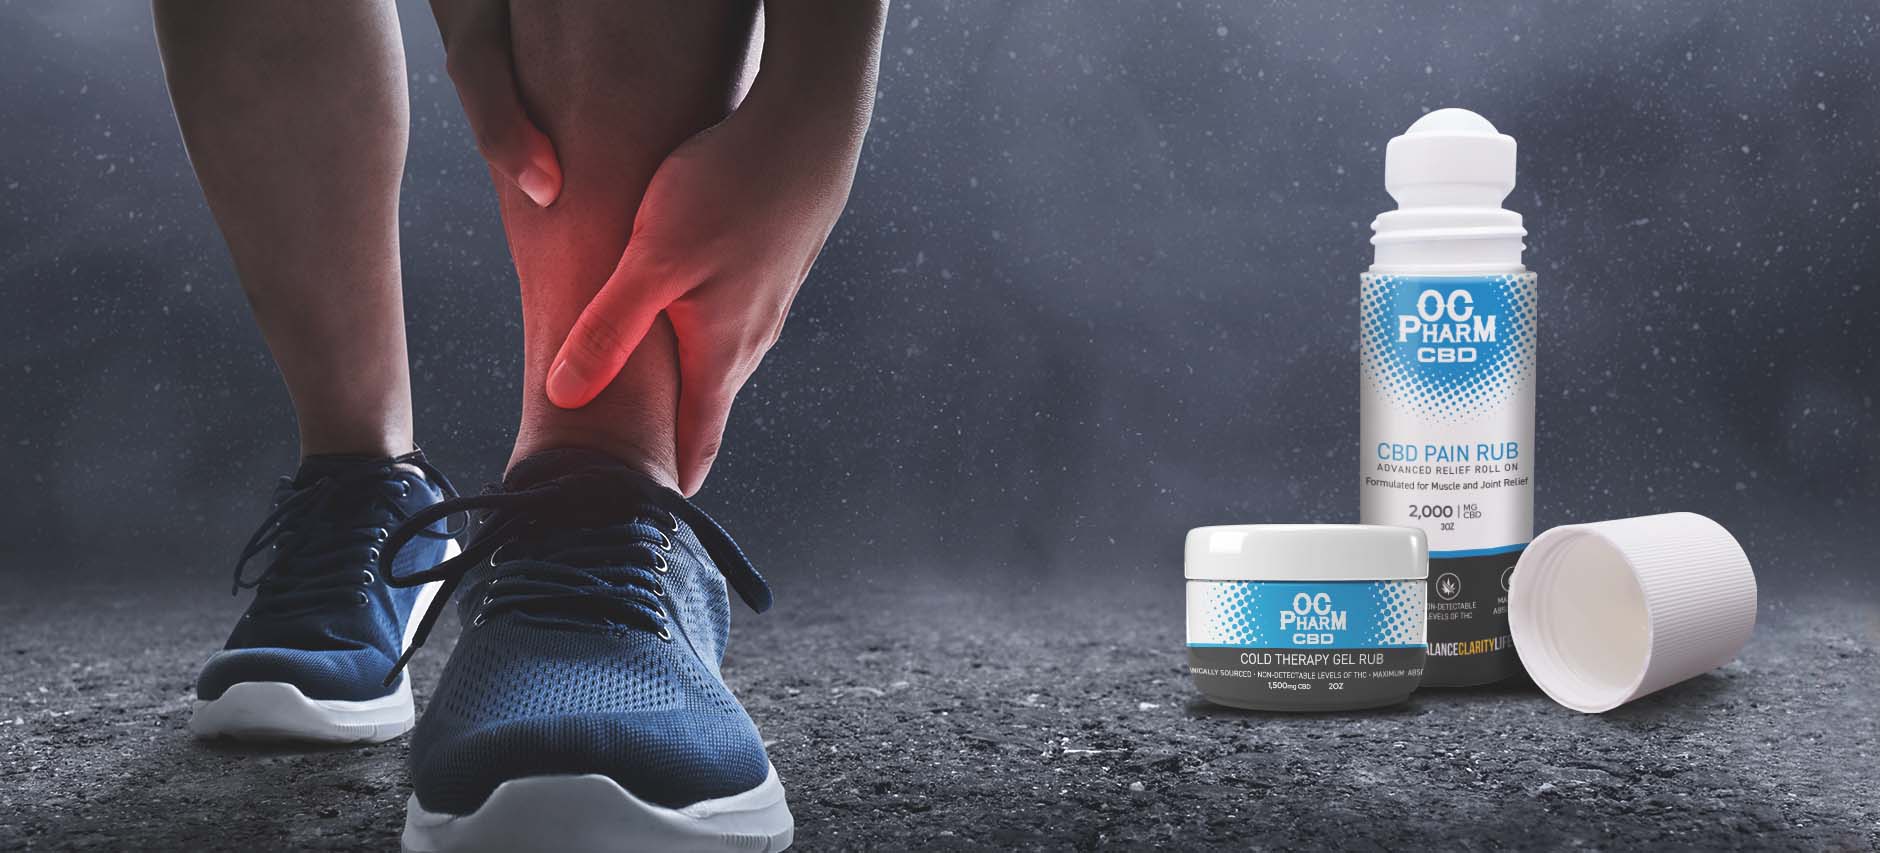 Introducing our new CBD Pain Rub and Cold Therapy Gel